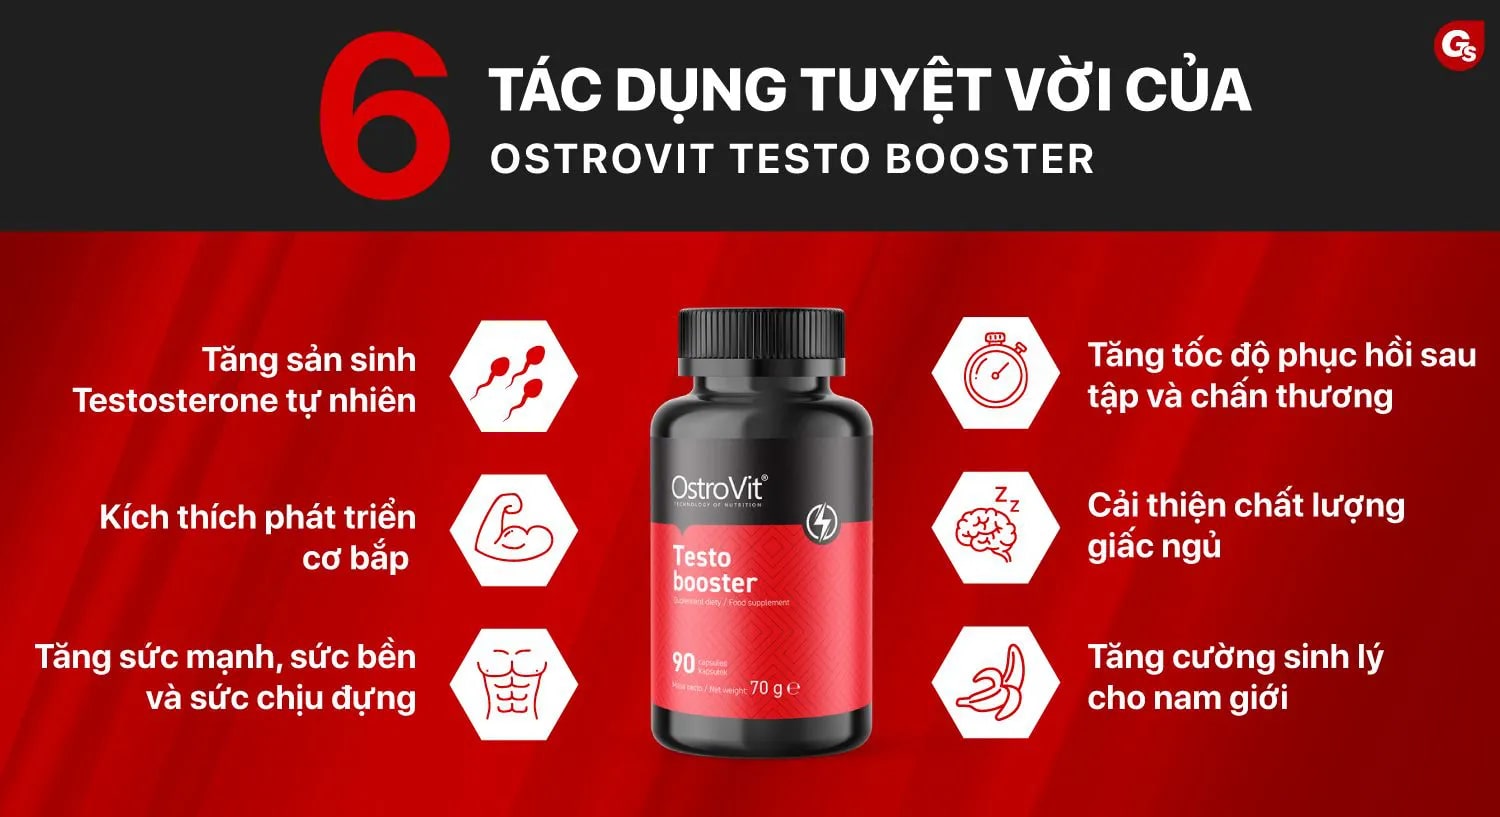 review-danh-gia-ostrovit-testo-booster-gymstore-3